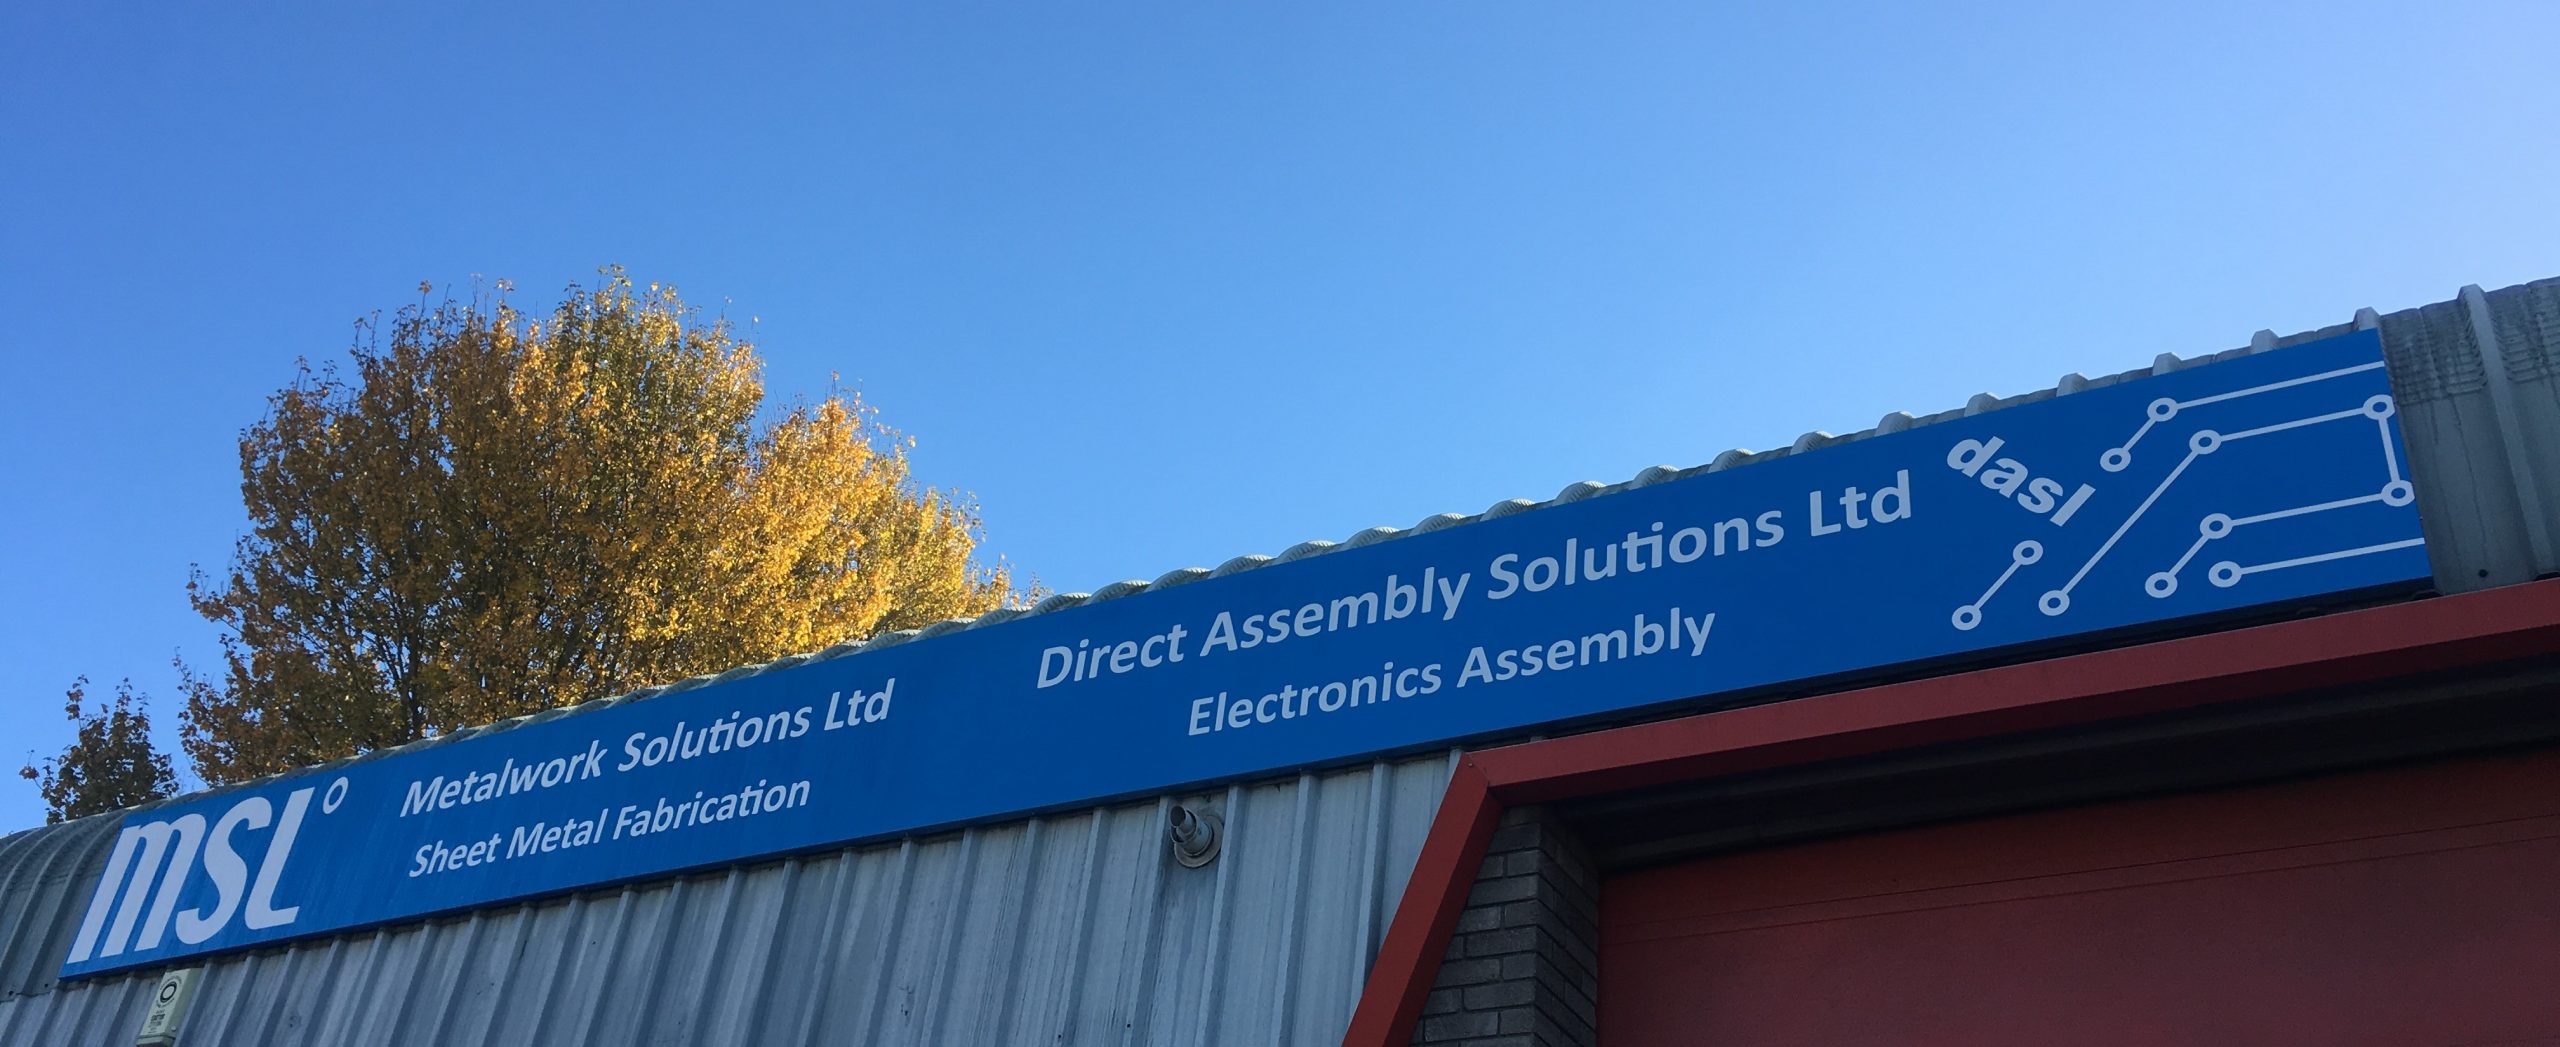 Metalwork Solutions Ltd & Direct Assembly Solutions Ltd.